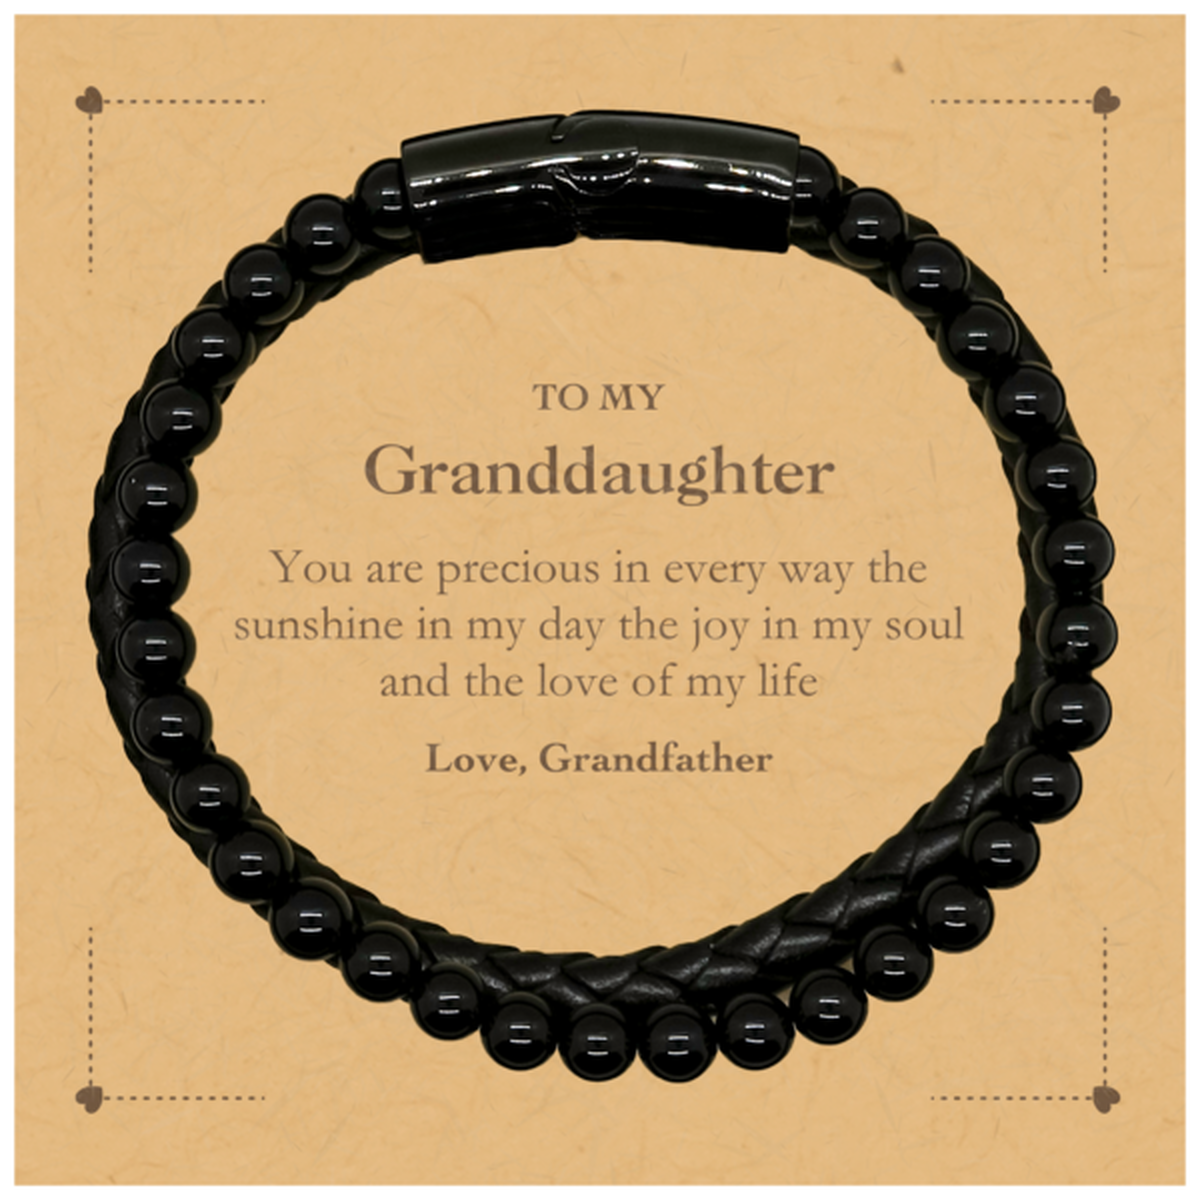 Graduation Gifts for Granddaughter Stone Leather Bracelets Present from Grandfather, Christmas Granddaughter Birthday Gifts Granddaughter You are precious in every way the sunshine in my day. Love, Grandfather